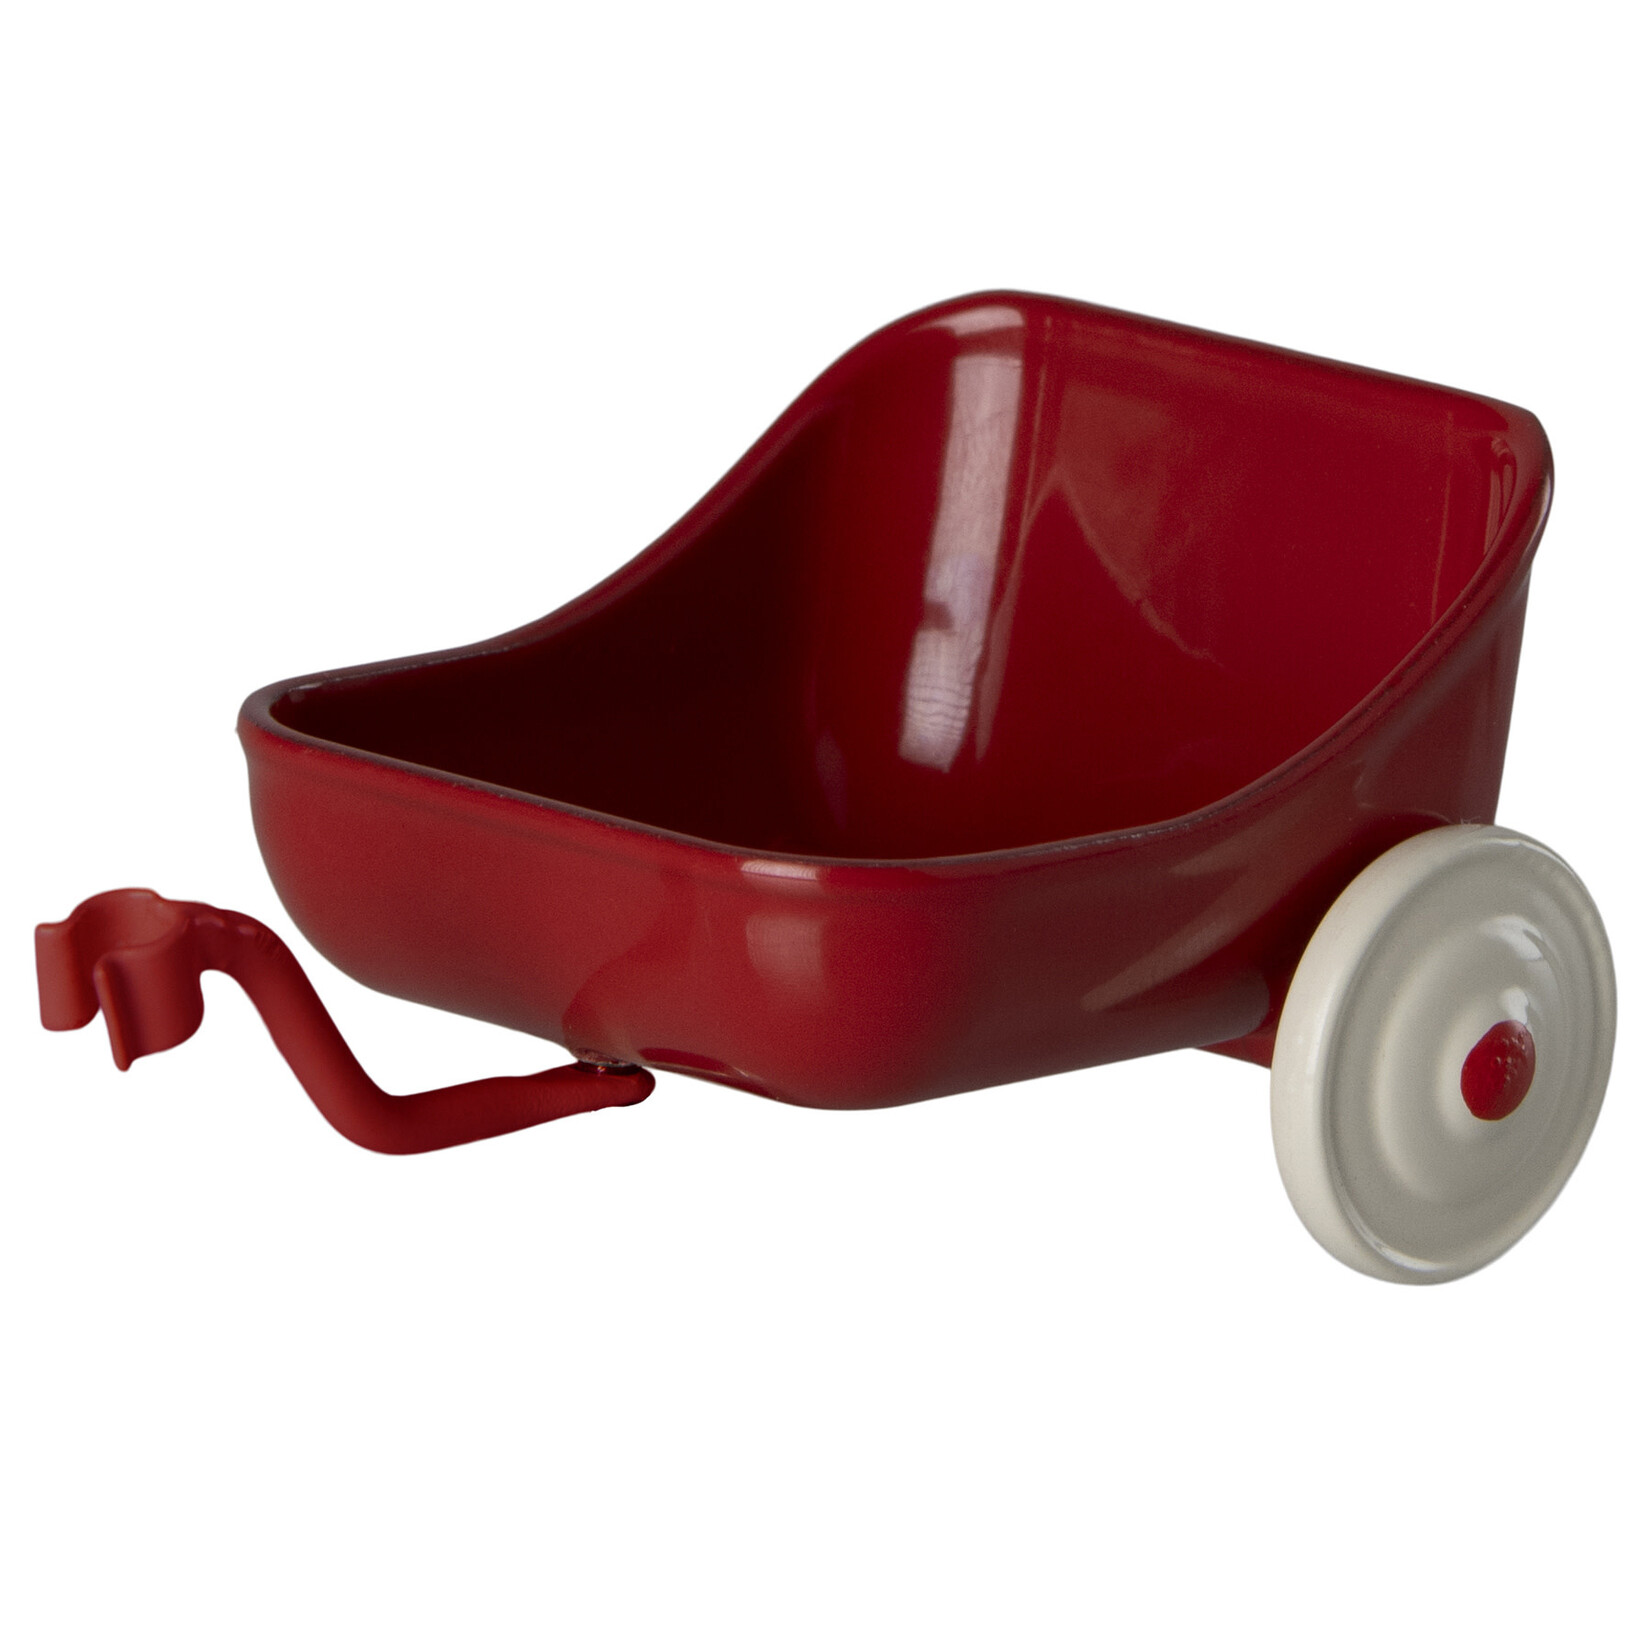 Maileg Maileg Tricycle hanger Red Trailer add on for Mouse size